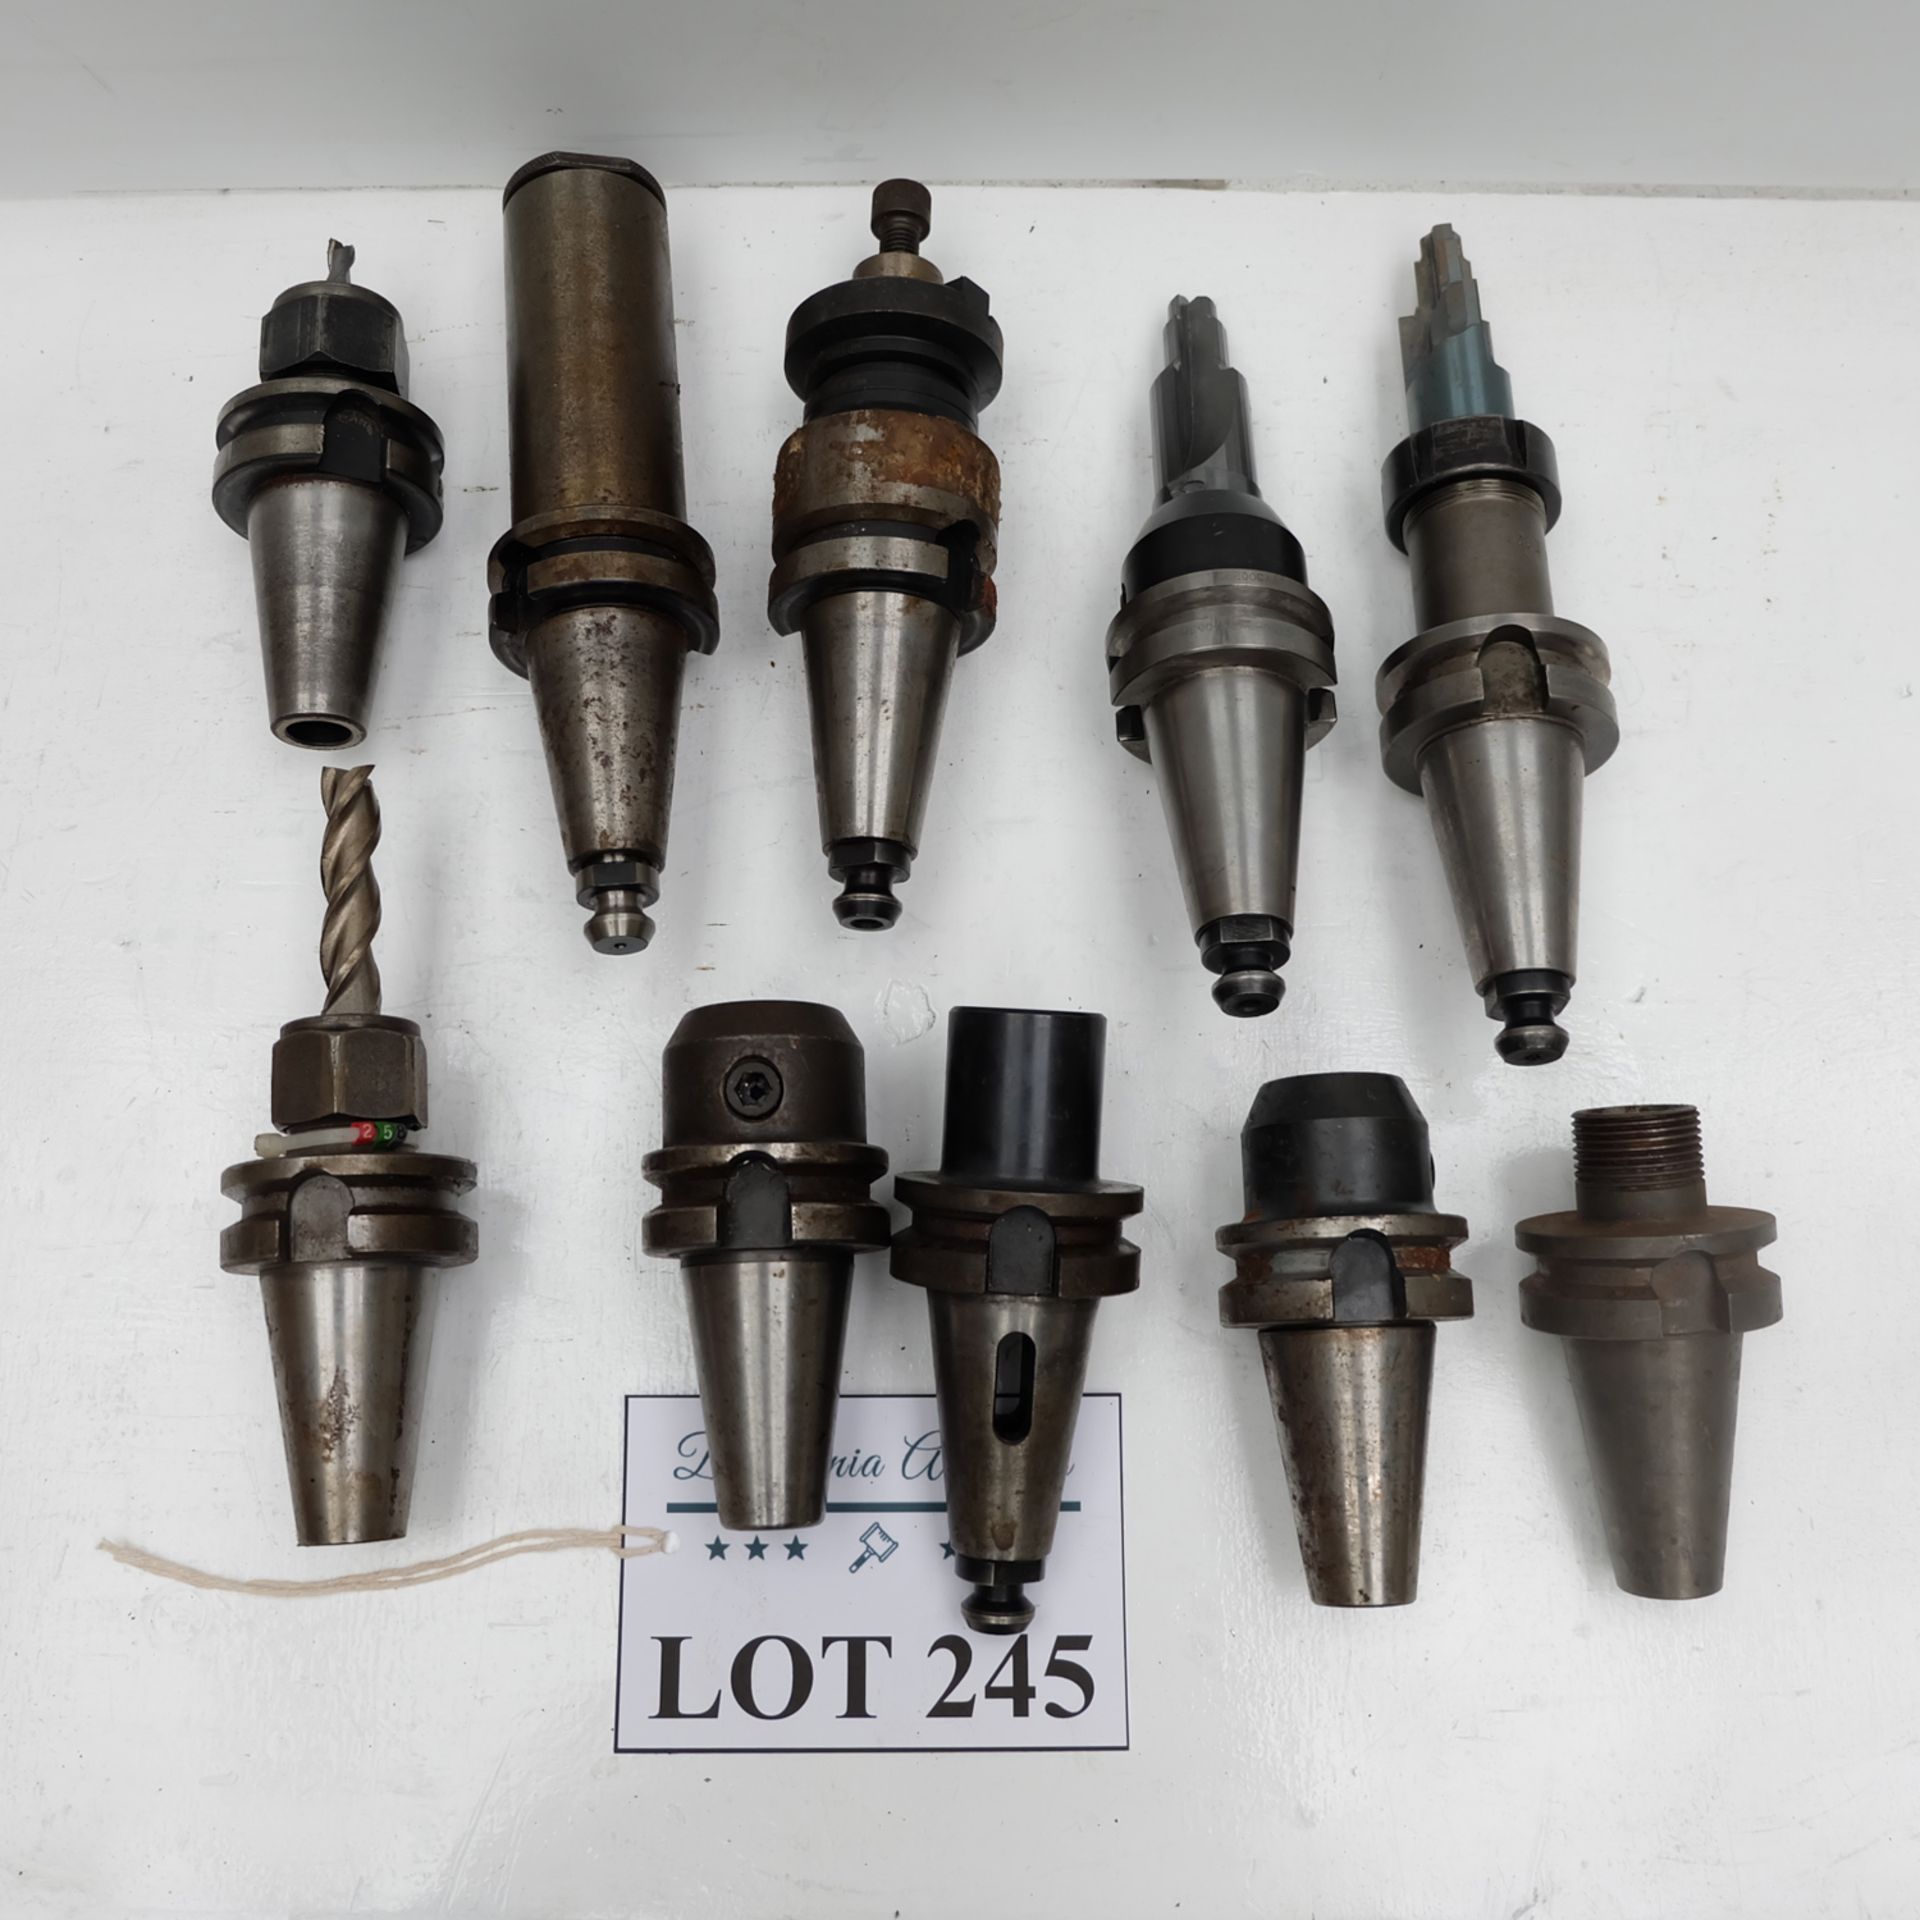 Quantity of 10 x BT 40 Spindle Tooling. - Image 2 of 4